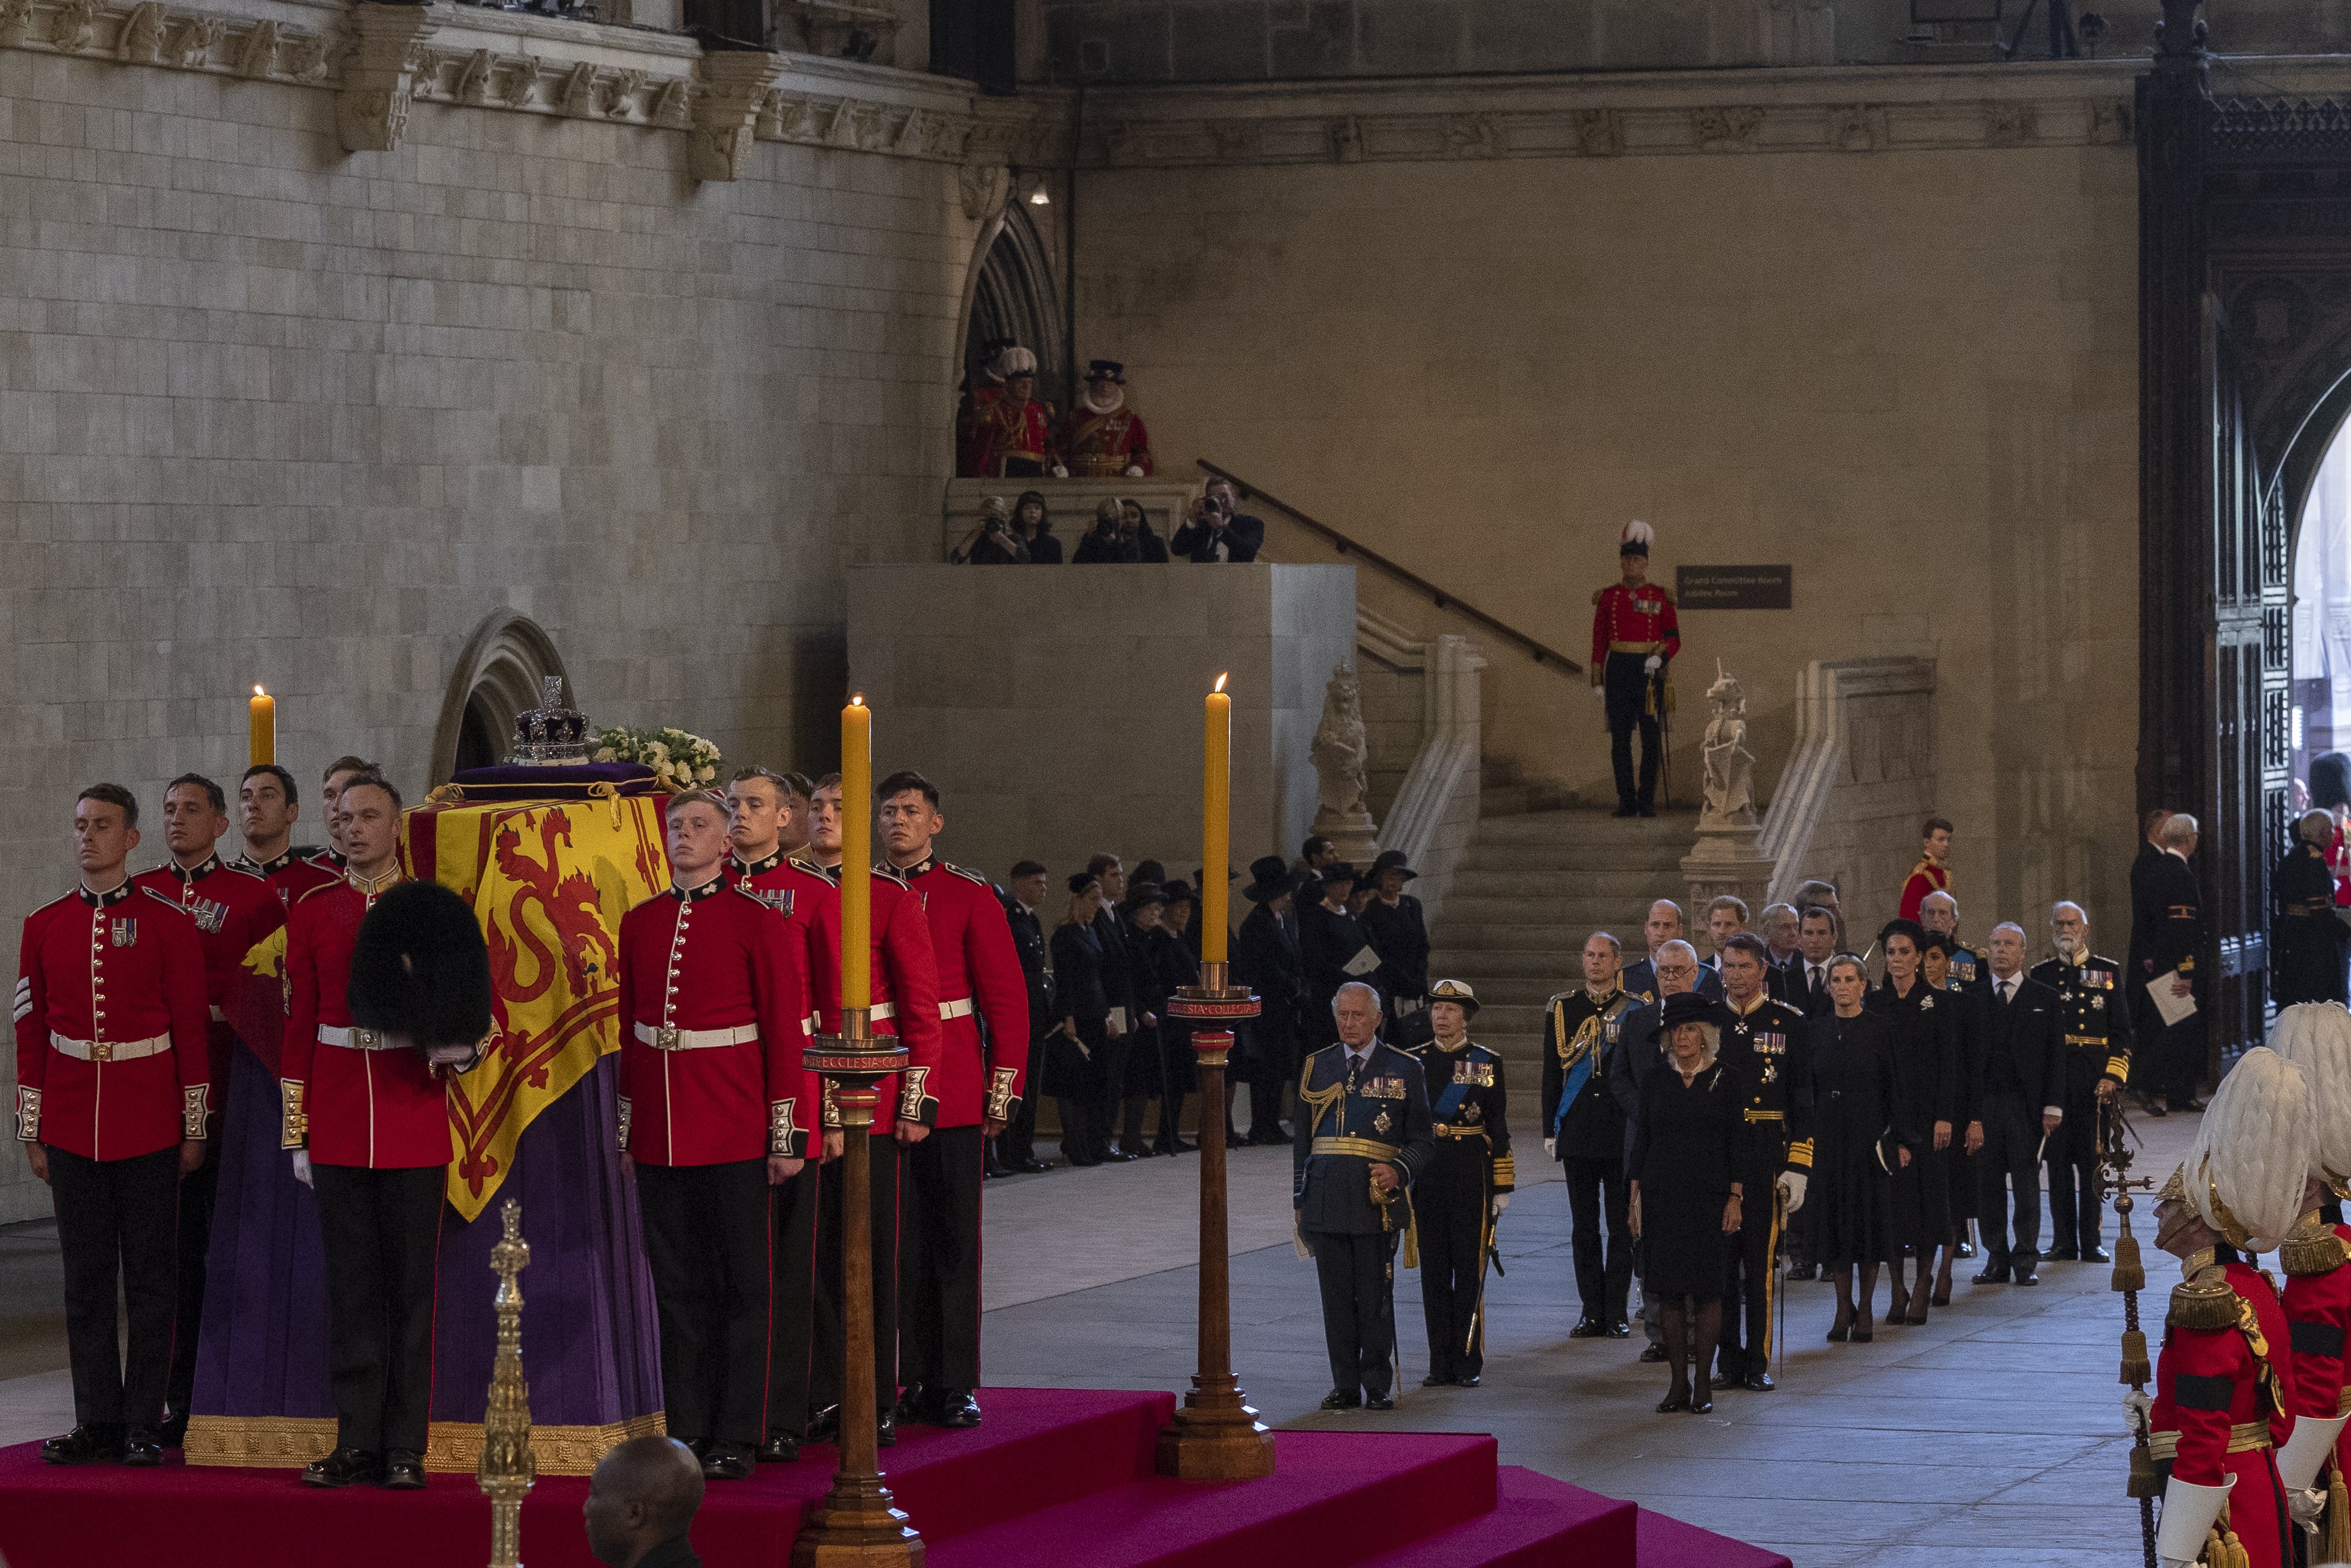 The coffin carrying Queen Elizabeth II is laid to rest in Westminster Hall for the Lying-in State on September 14, 2022 in London, England. | Source: Getty Images